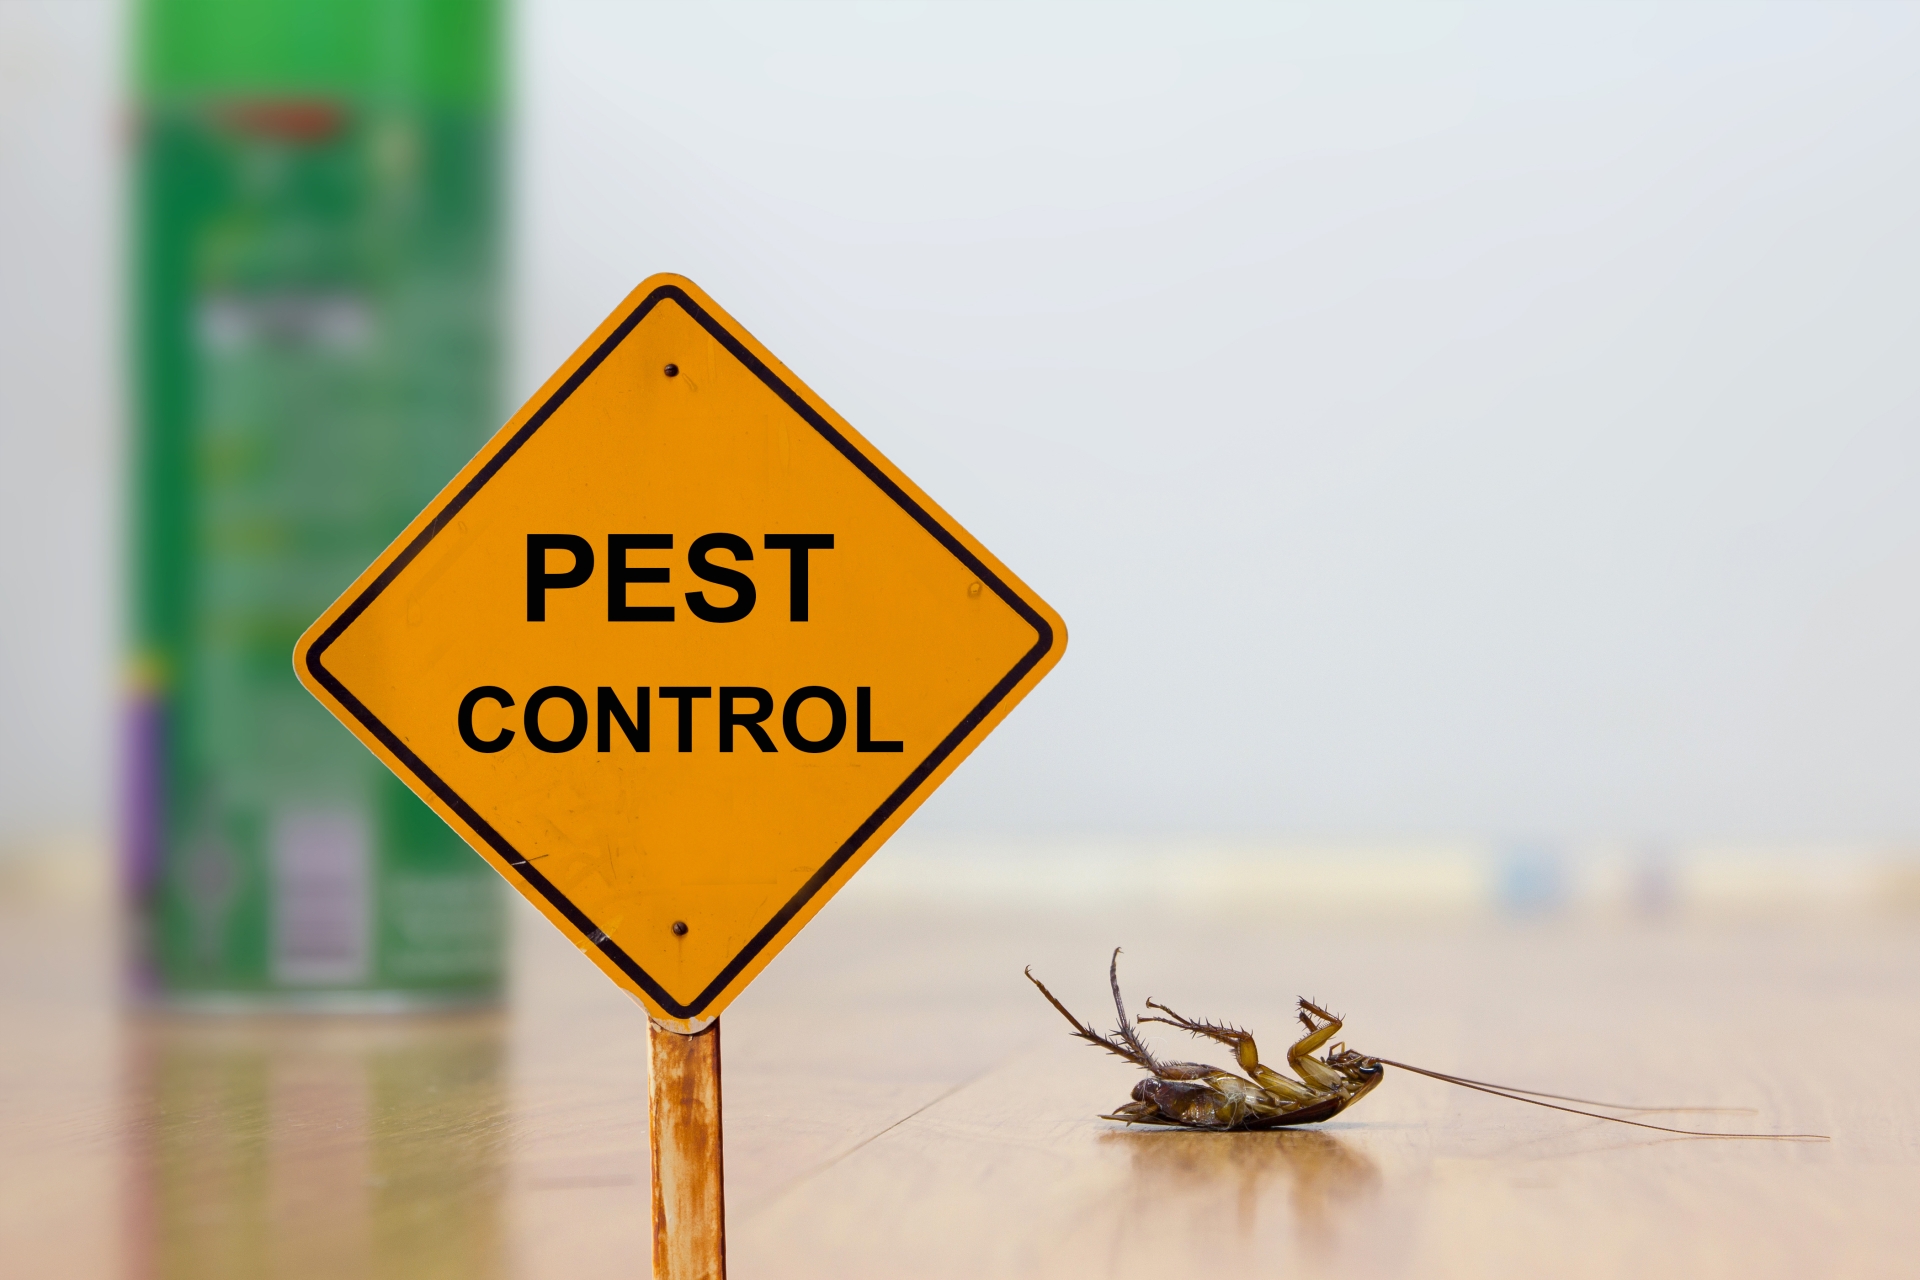 24 Hour Pest Control, Pest Control in Sutton, Rose Hill, SM1. Call Now 020 8166 9746